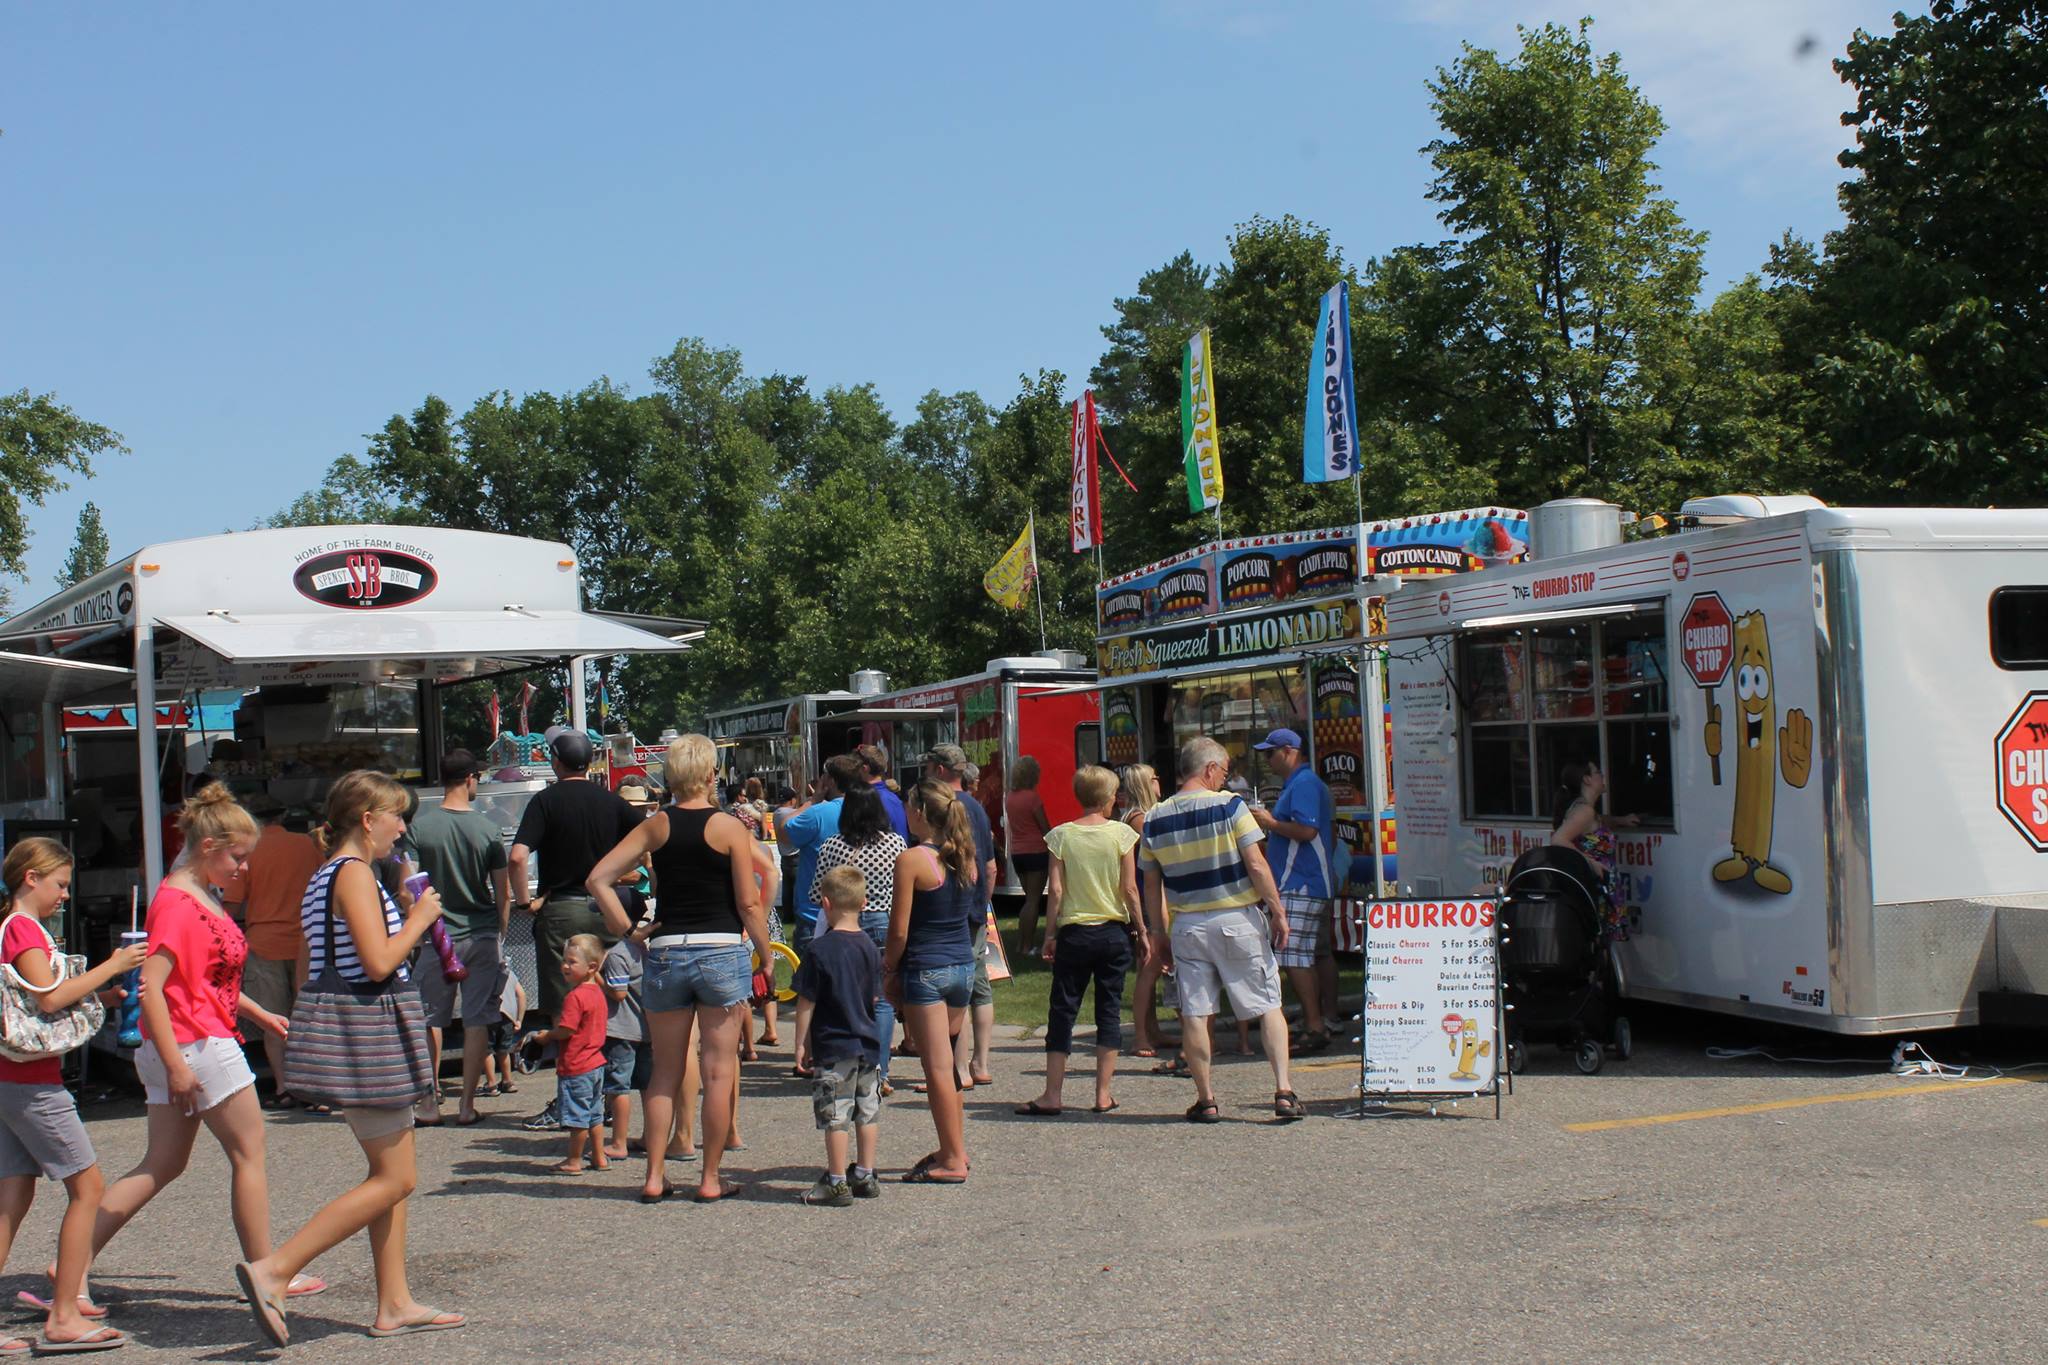 Festival-goers at the Manitoba Sunflower Festival waiting in line at a food truck.